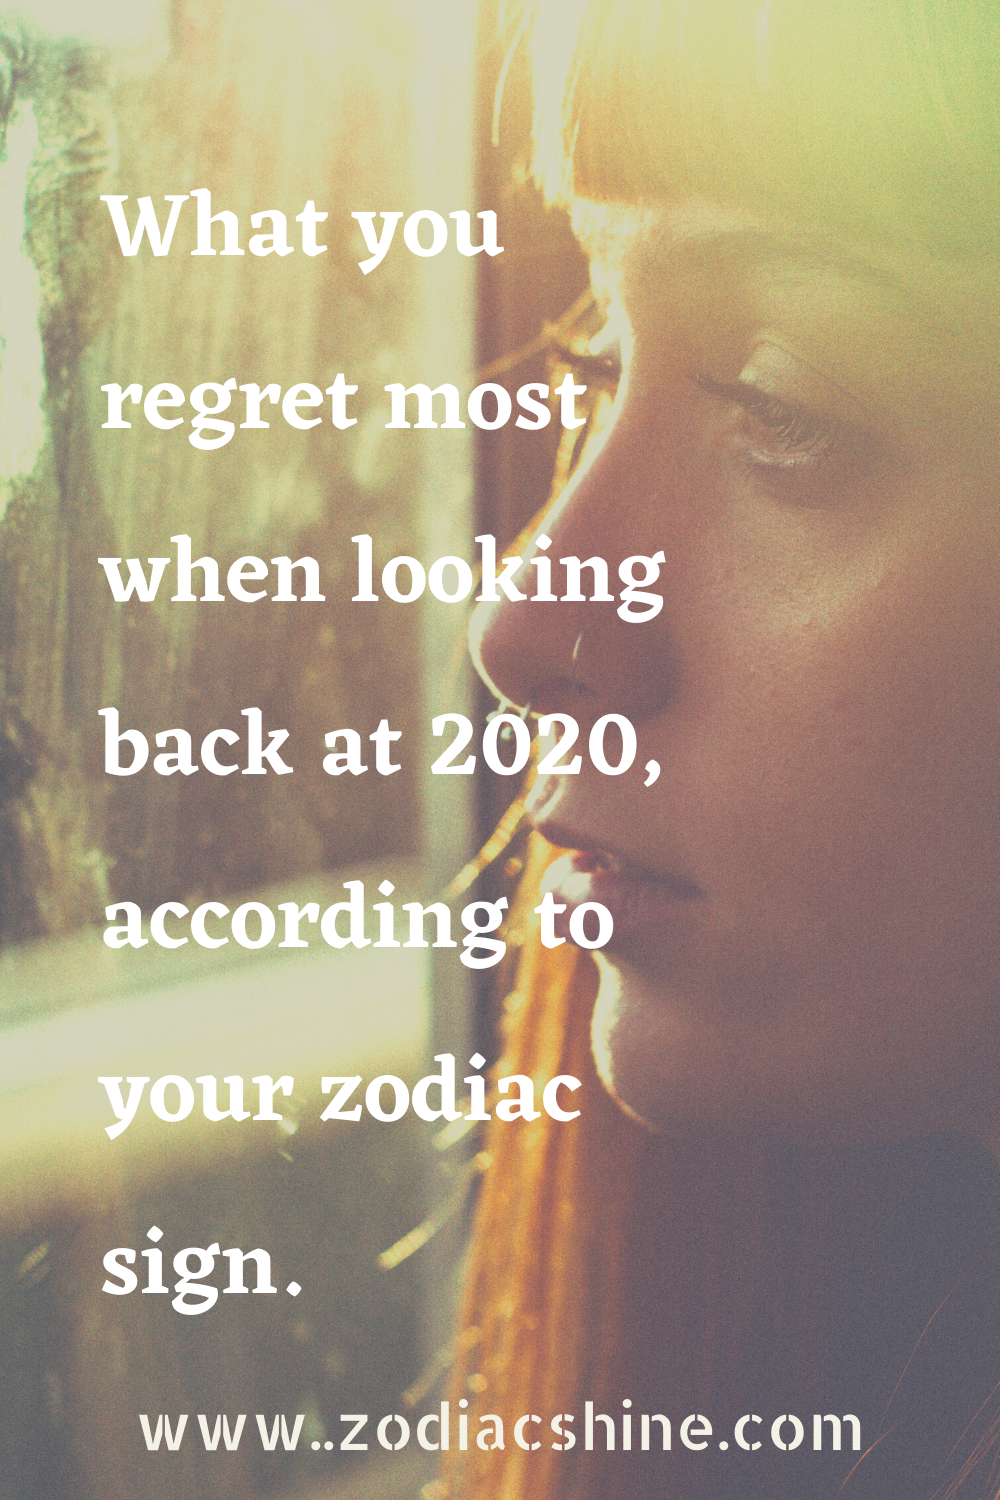 What you regret most when looking back at 2020, according to your zodiac sign.